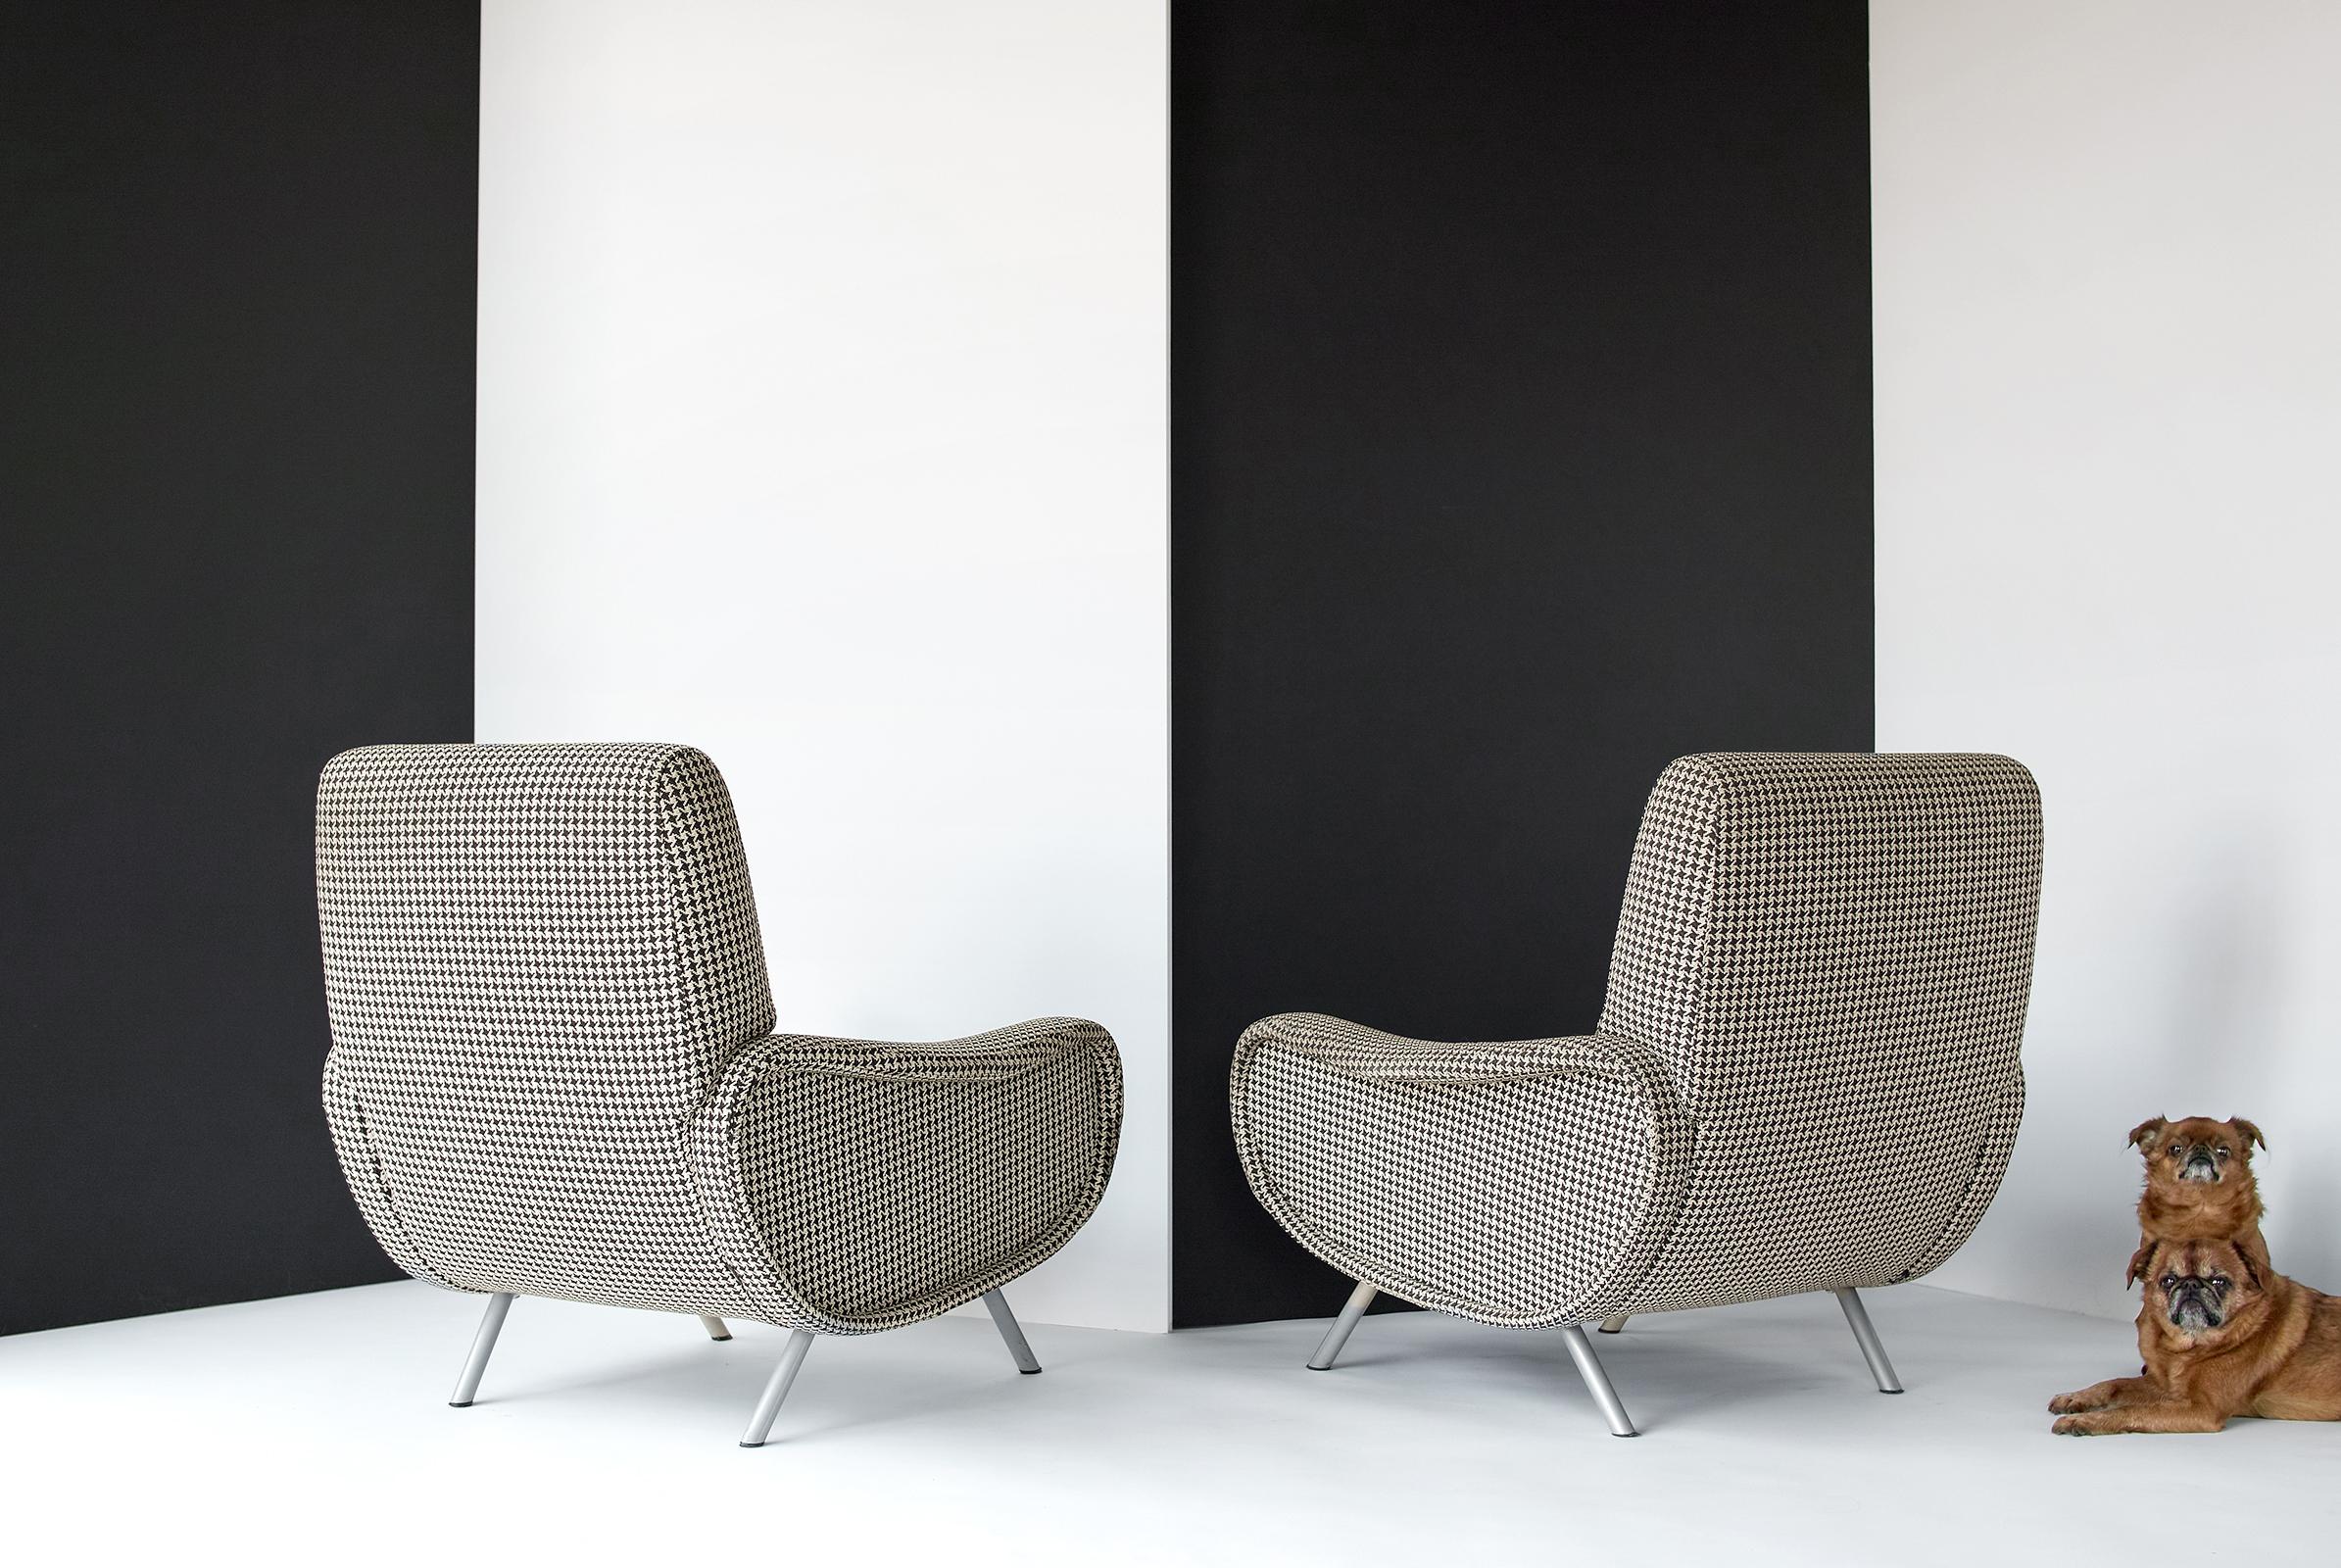 Designed in 1951 by Marco Zanuso for Arflex, the Lady armchair won the gold medal at the IX Milan Triennale in the same year. The armchair stands as a modern icon, the fruit of innovation that turned the traditional manufacturing technique for